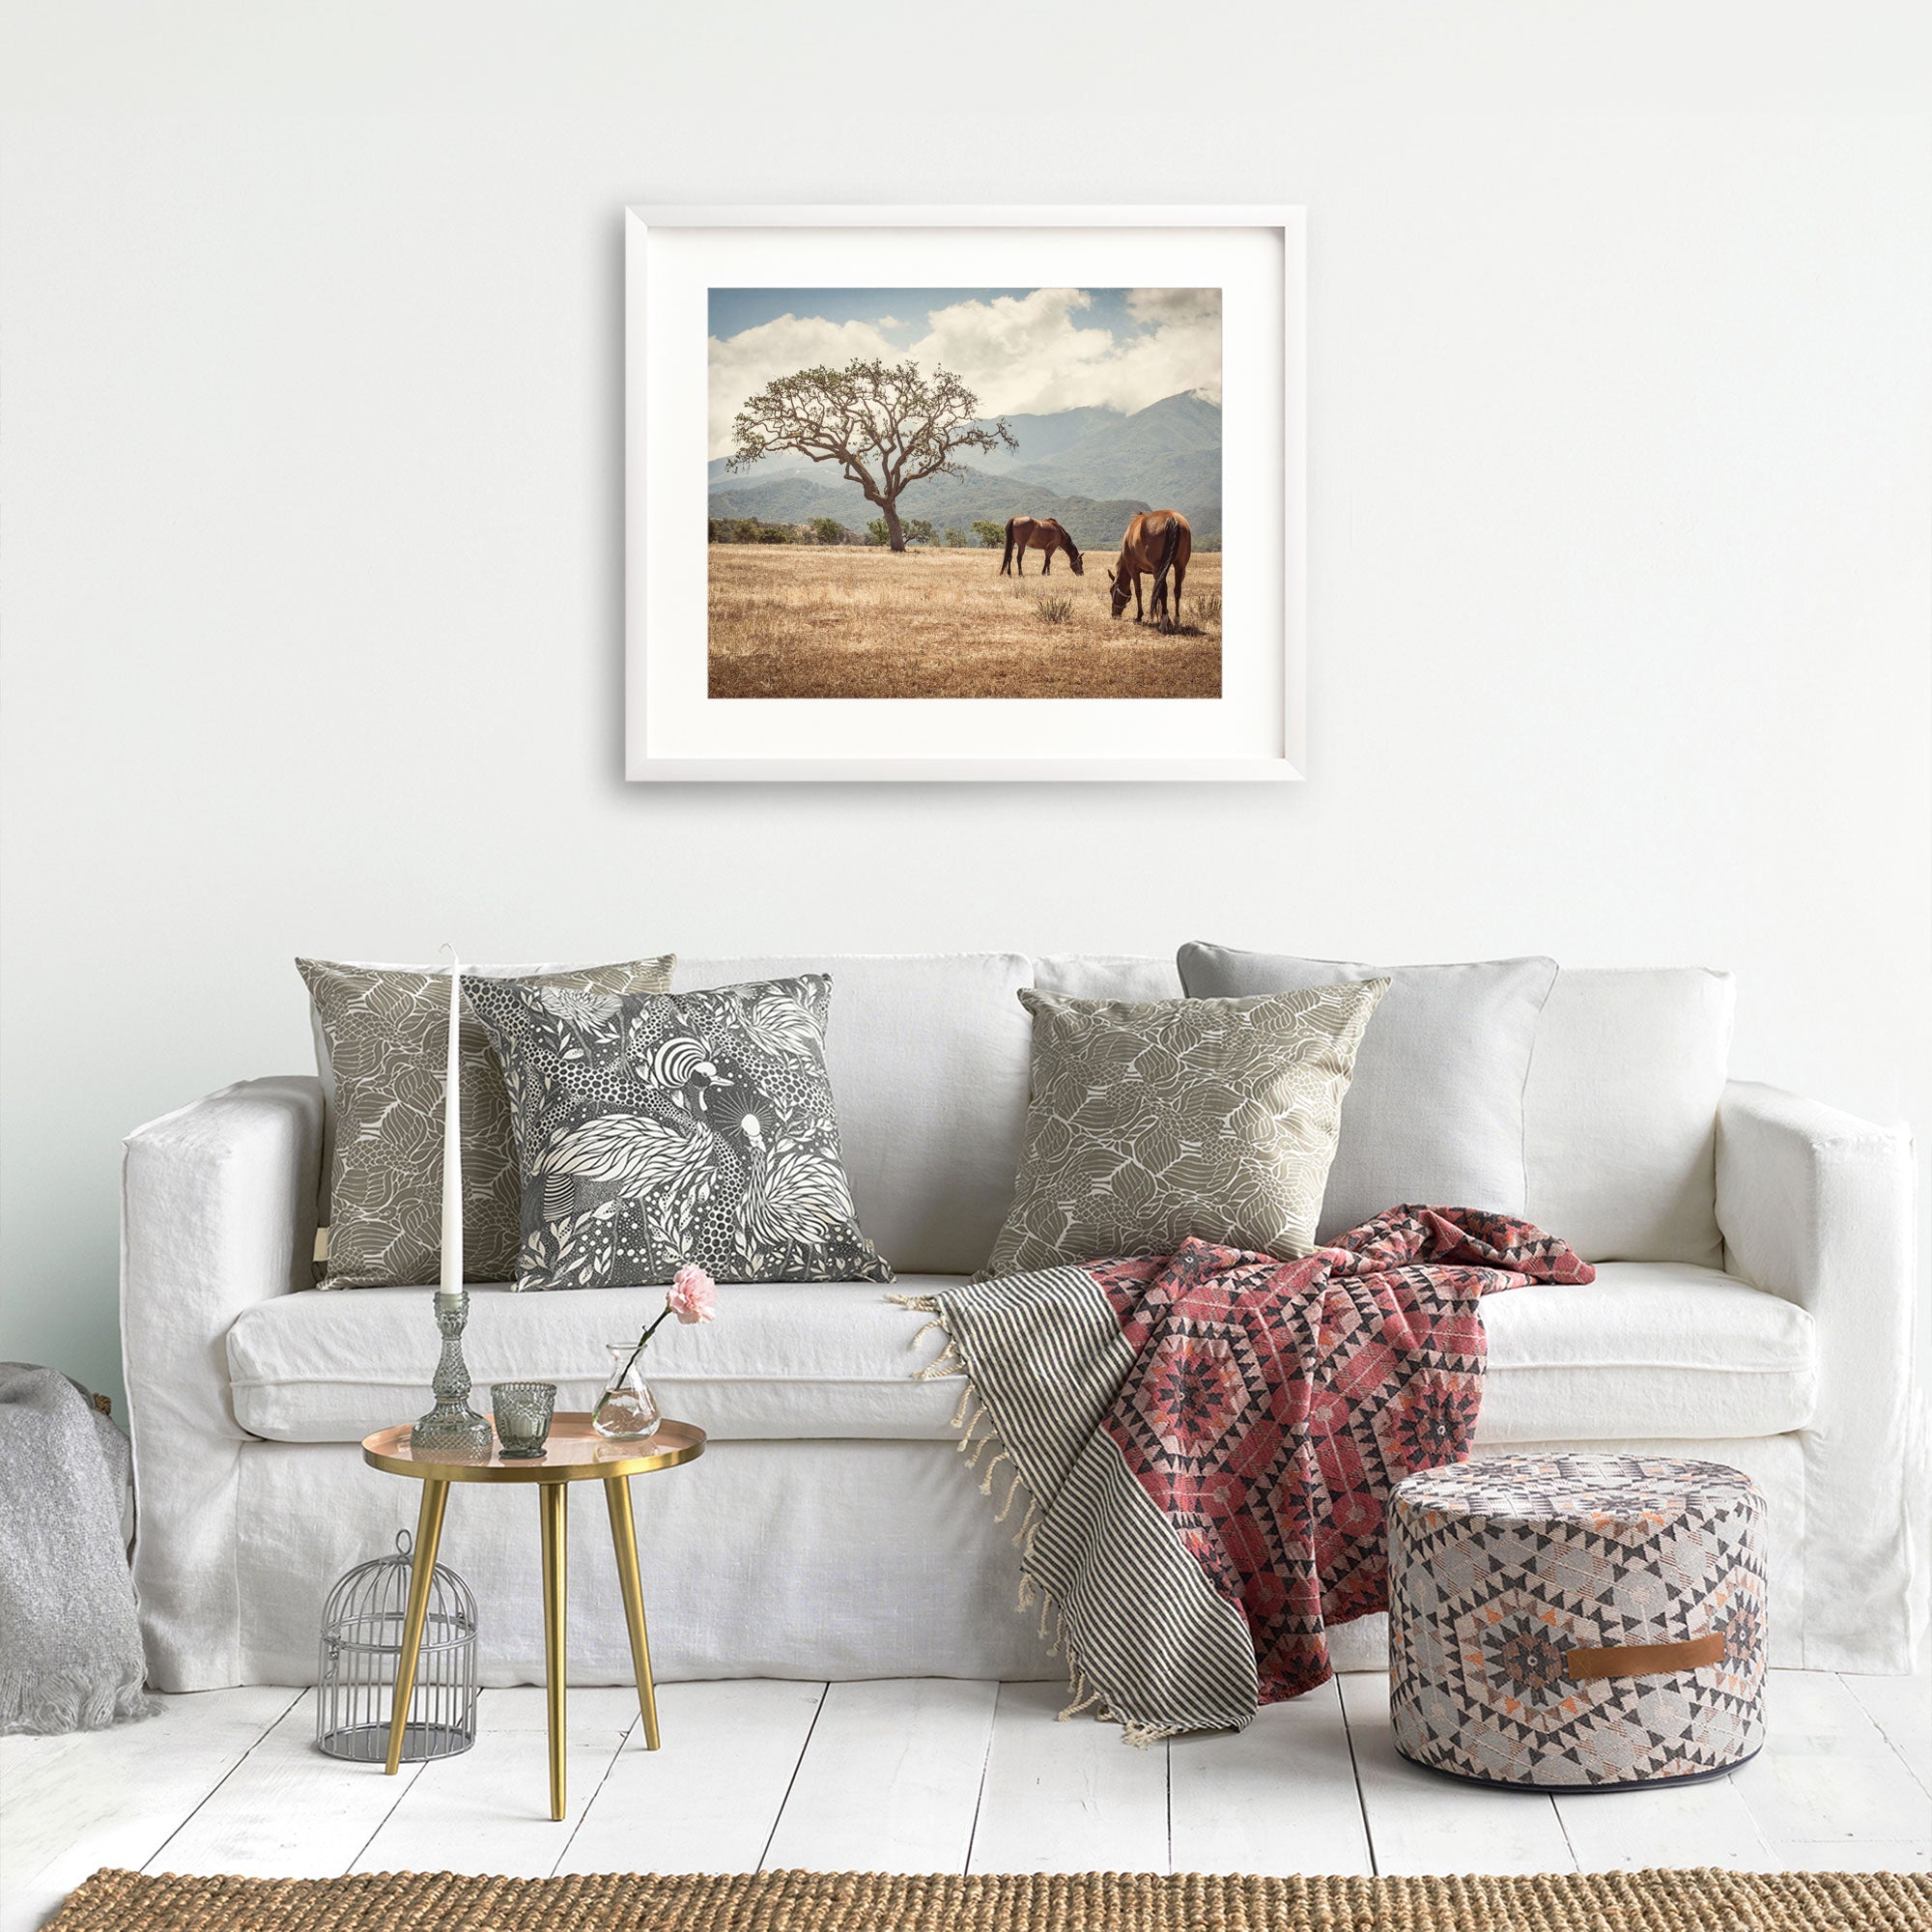 A cozy living room featuring a white sofa adorned with patterned cushions, a red throw, a small round table with decor items, and a framed rustic print of horses in a field titled 'Santa Ynez Horses' by Offley Green.